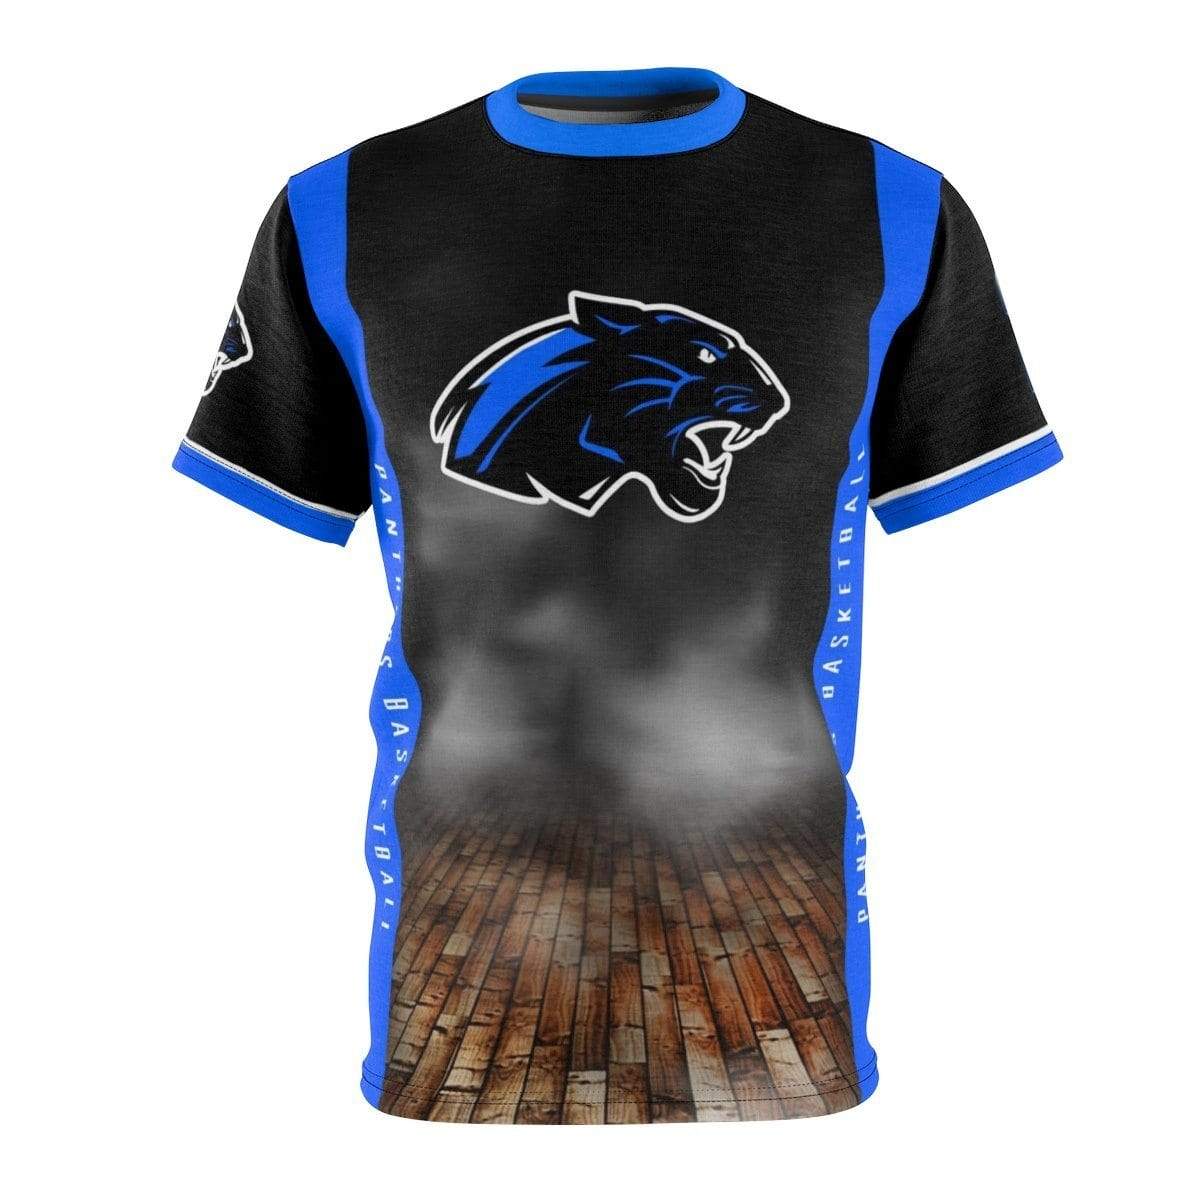 Vapor - V.1 - Extreme Sportswear Cut & Sew Shirt Template-Photoshop Template - Photo Solutions